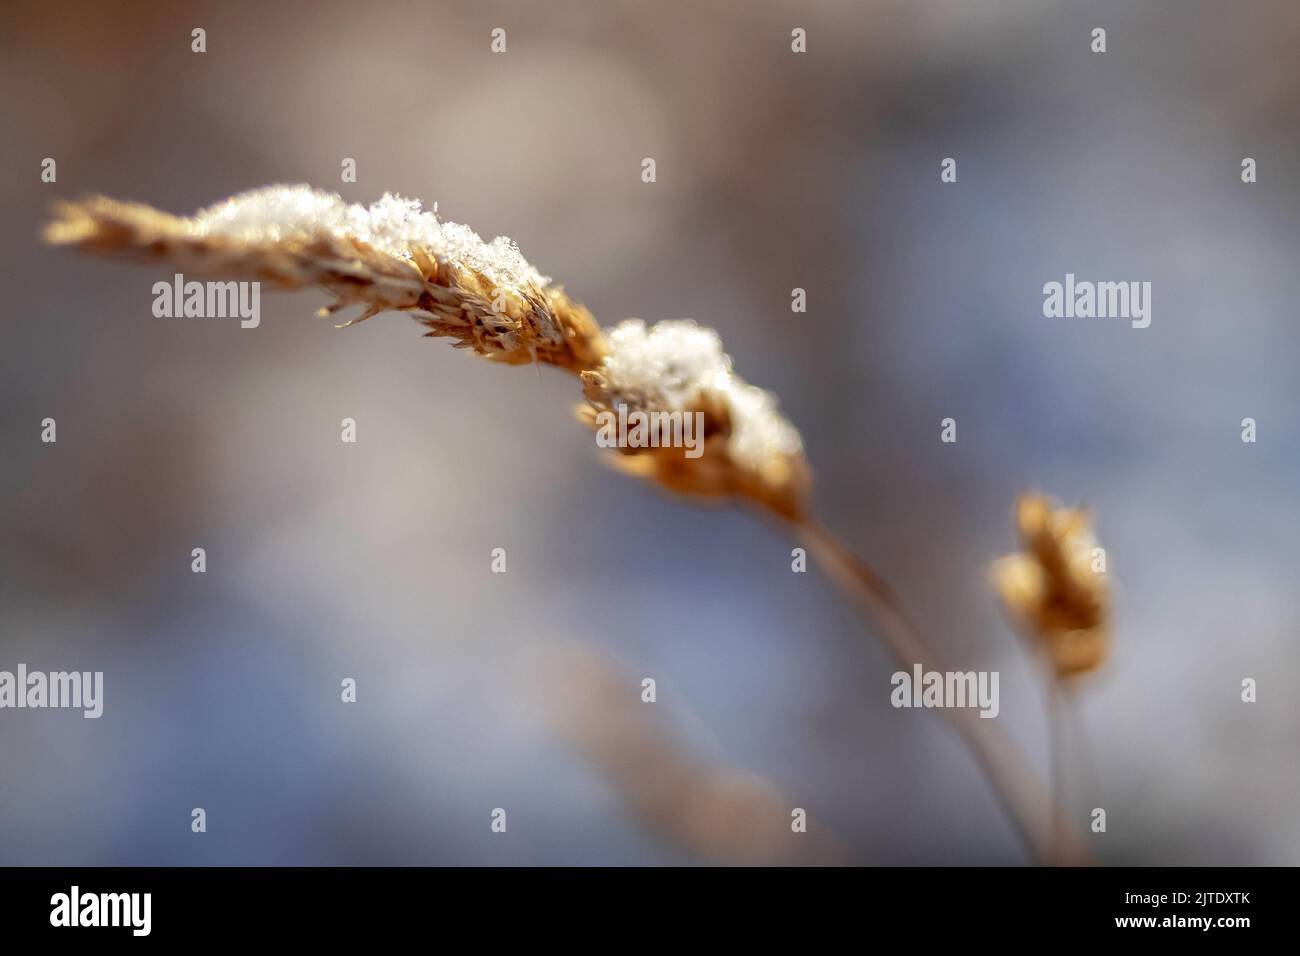 dry grass covered with snow, outdoor close up view in a winter season Stock Photo